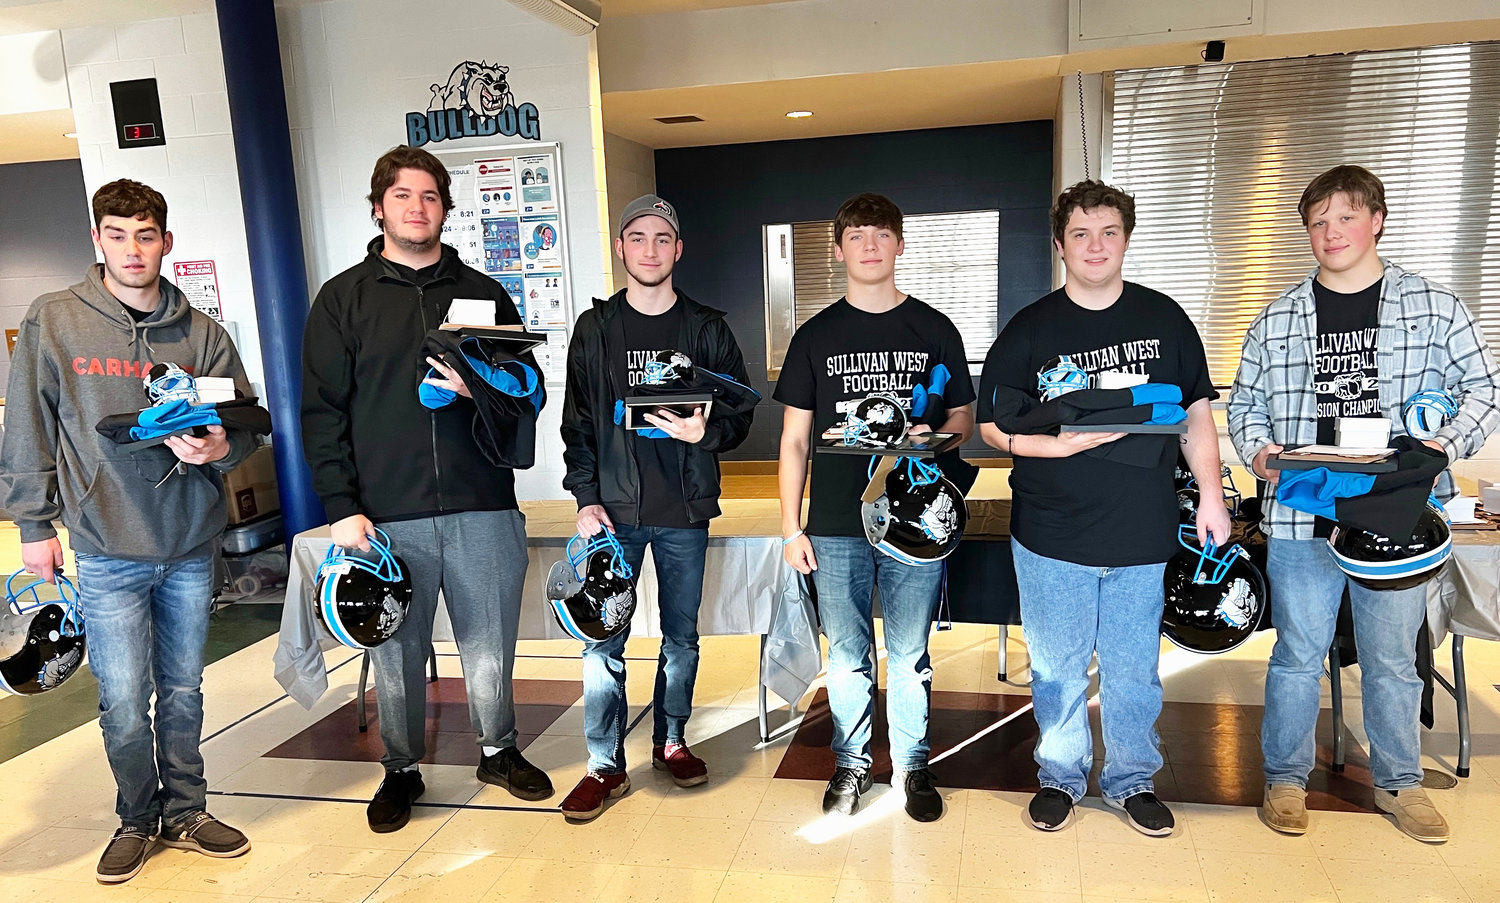 Sullivan West seniors hold the gifts they received including helmets, action shot framed photos, sweatshirts and watches that had a Division Champion logo on the face. Pictured from left to right: James McElroy, Chris Campanelli, Mike Roth, Justin Grund, Ryan Joyce Turner and Gavin Hauschild. Tarrell Spencer was unable to attend the banquet but his praises were also sung by the coaches.